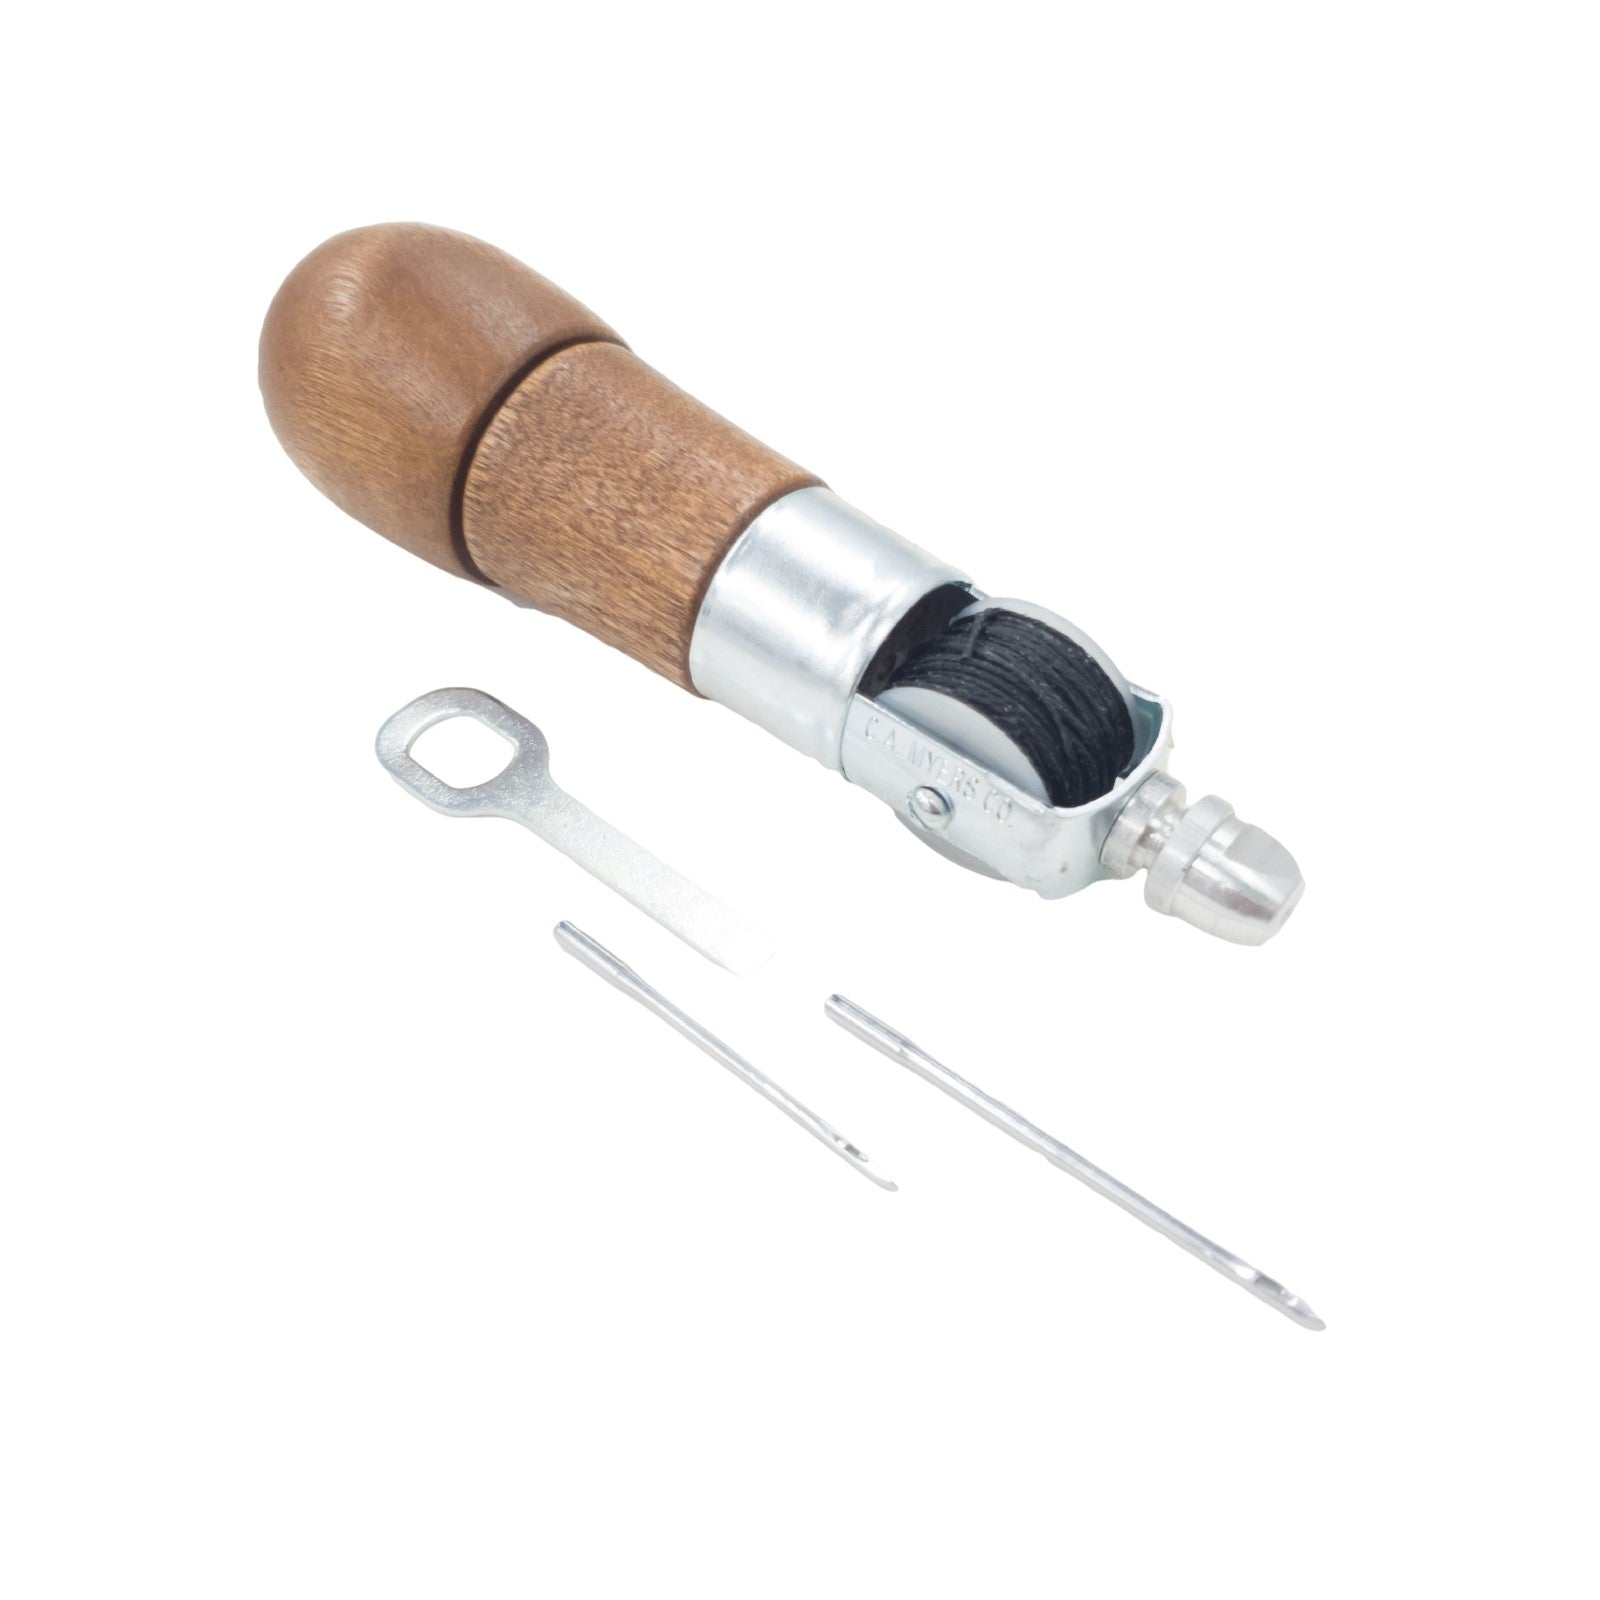 Leather Sewing Awl Kit – Sewing Mends Soul